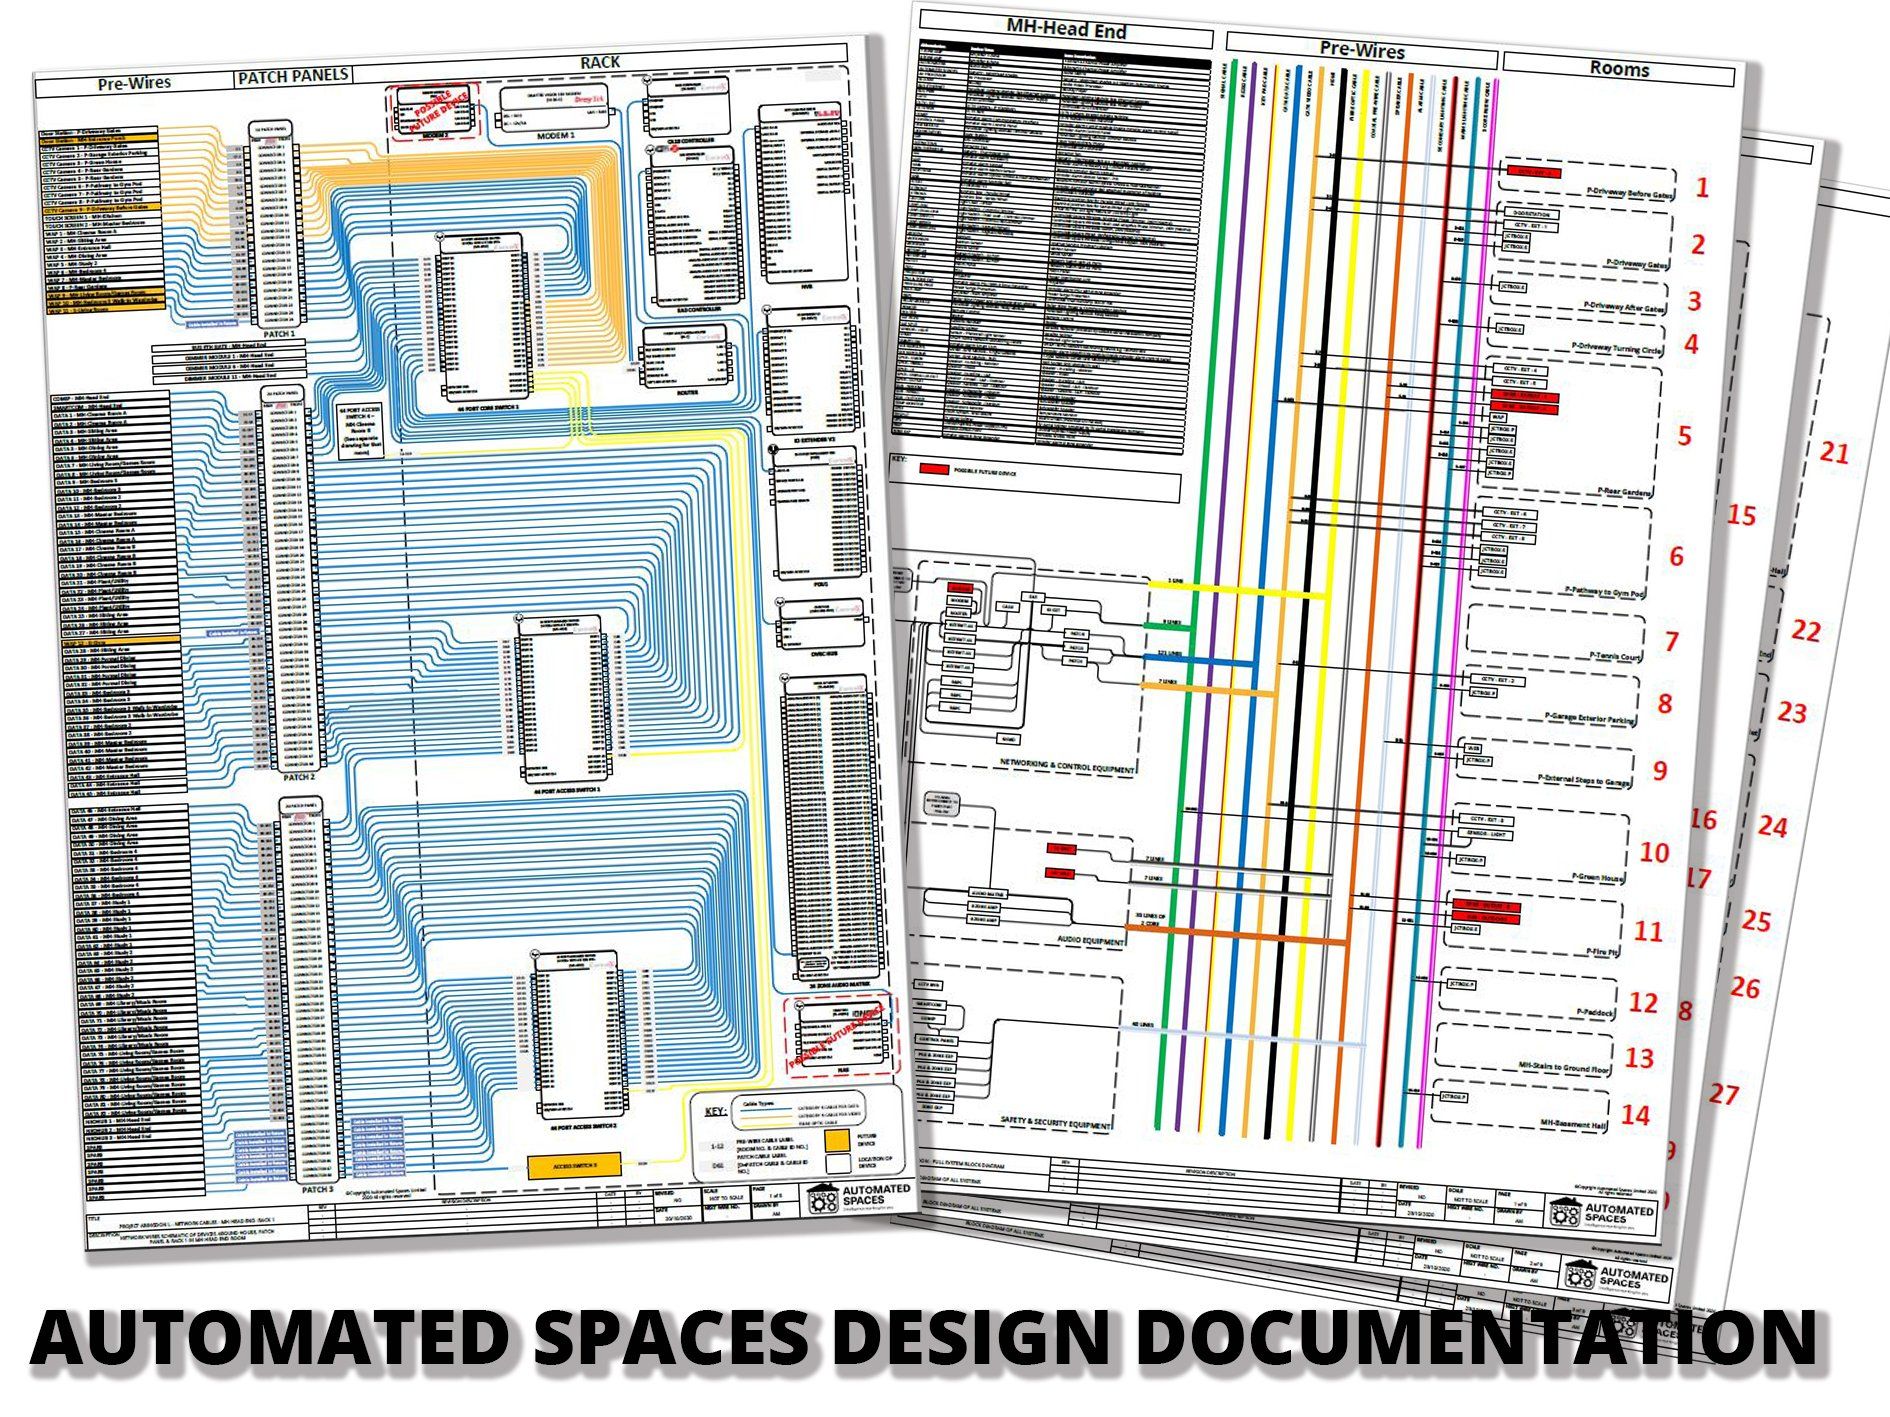 Photograph of some of Automated Spaces design documentation